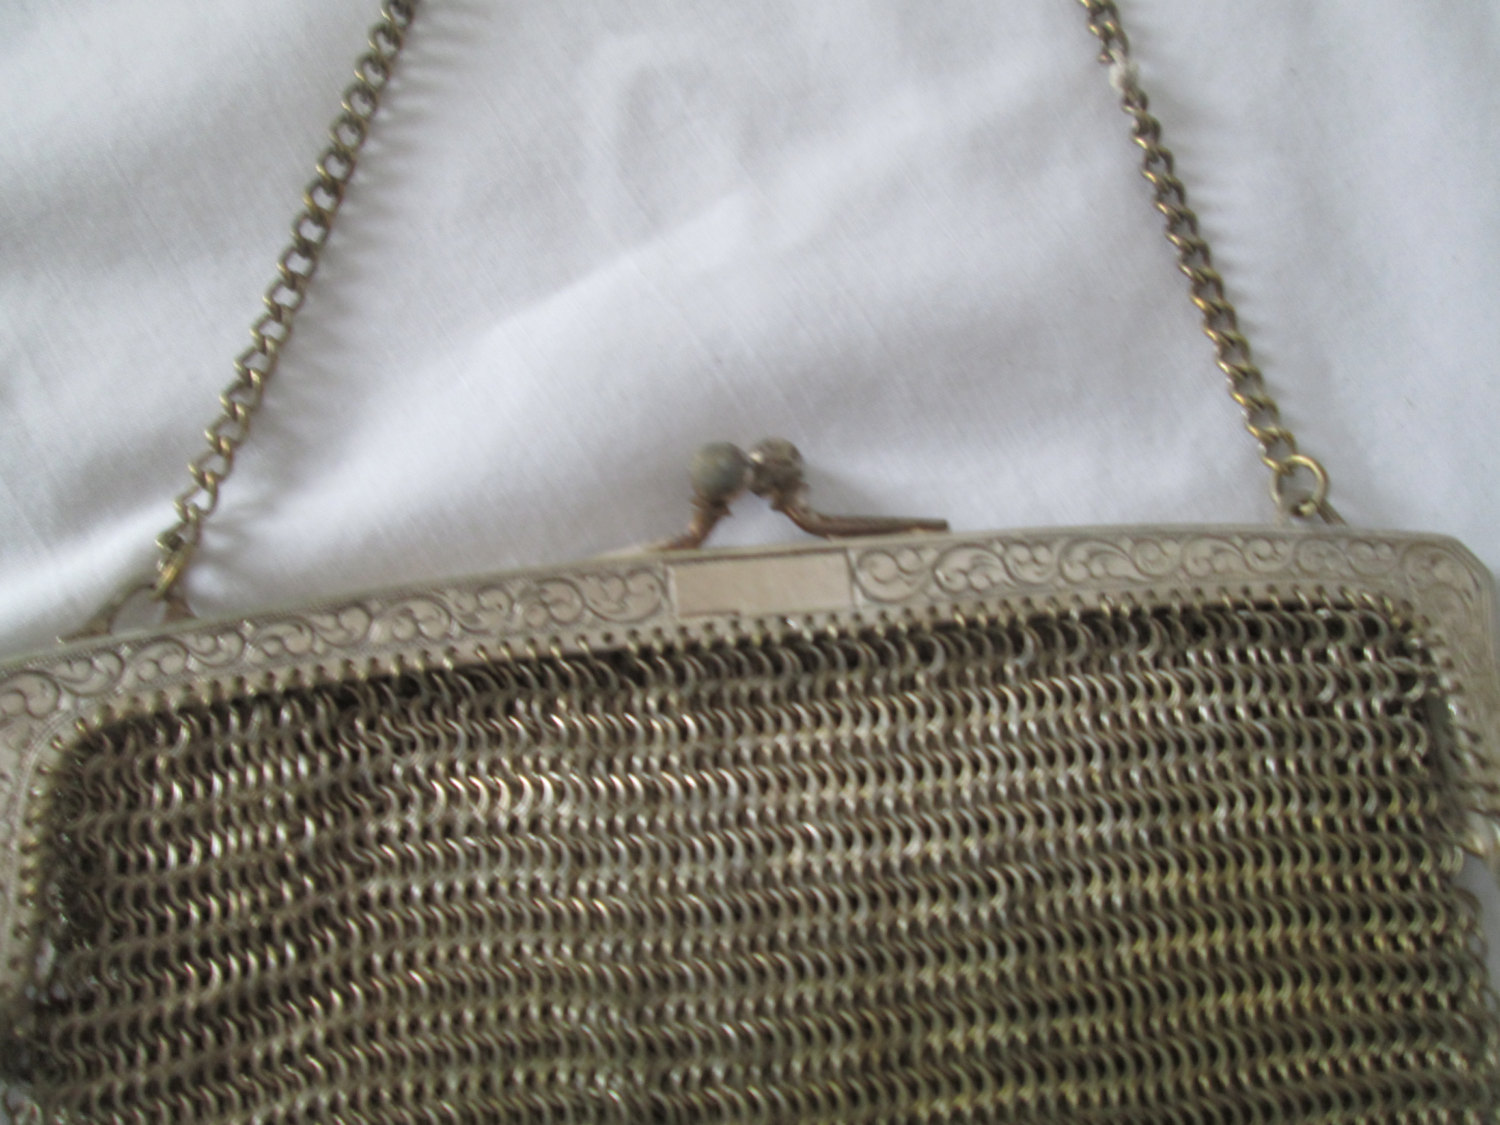 German Silver Mesh Purse - Garden Party Collection Vintage Jewelry